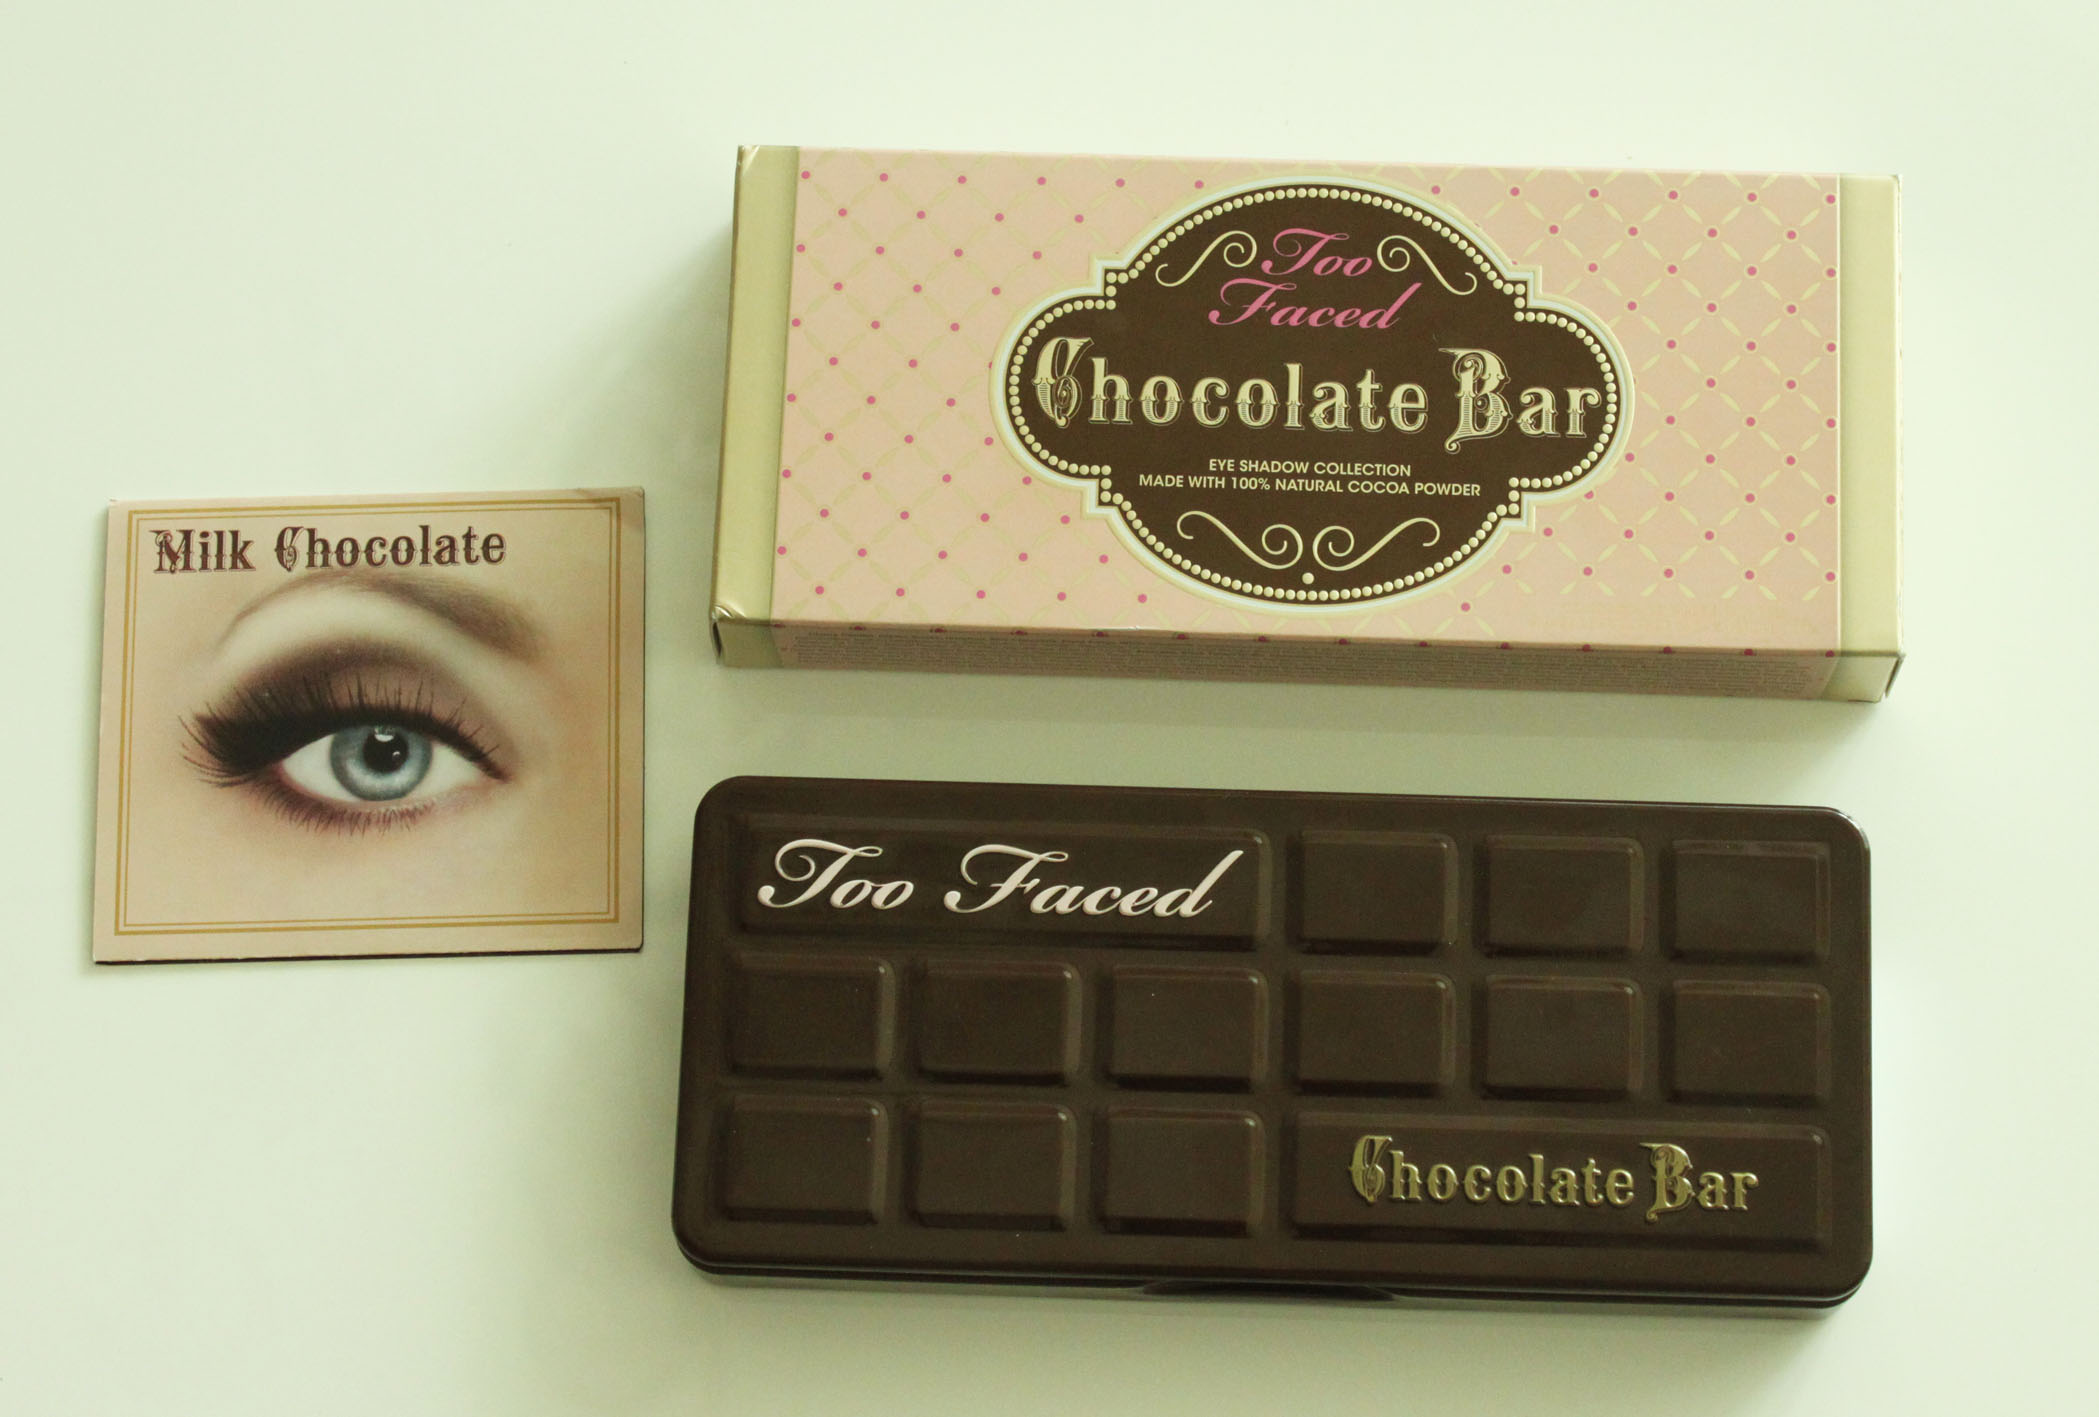 Two Faced Chocolate bar review